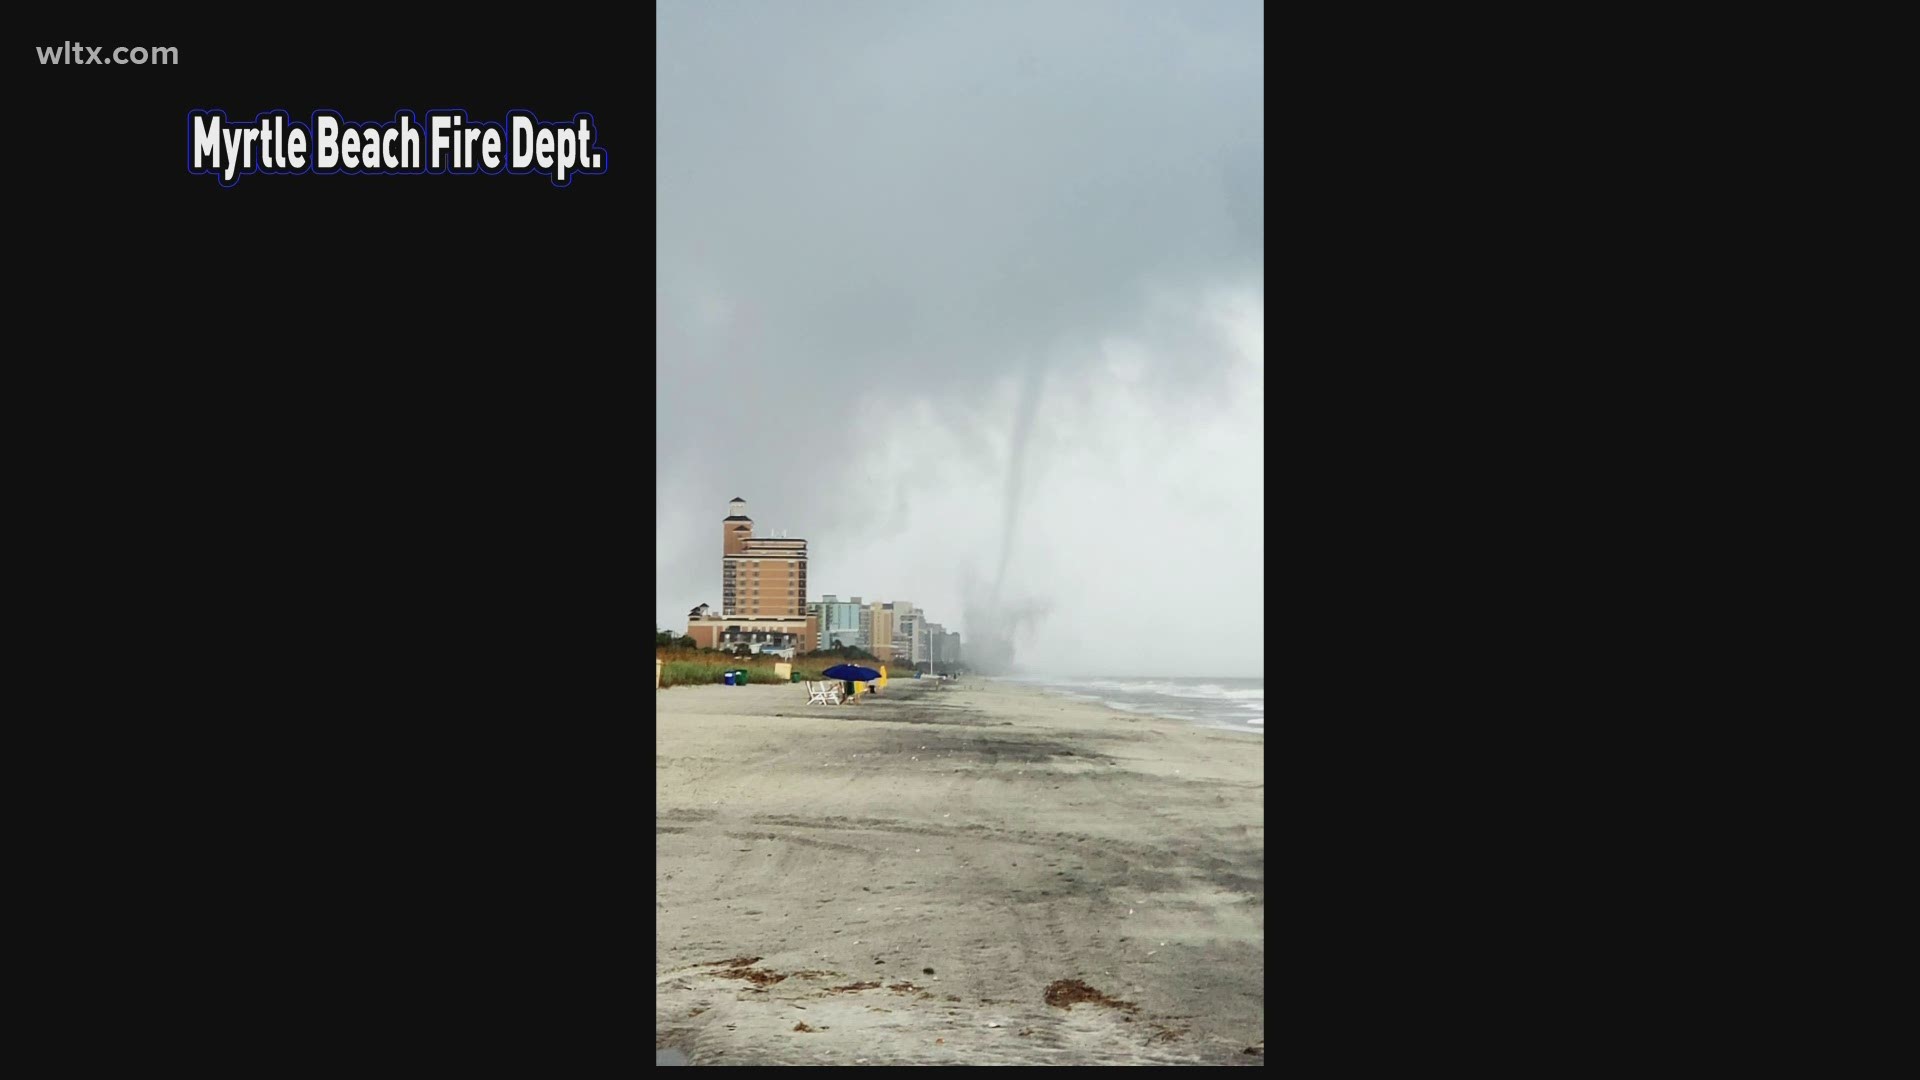 The twister touched down right along the shoreline in front of tourist and beachgoers Friday afternoon in Myrtle Beach.